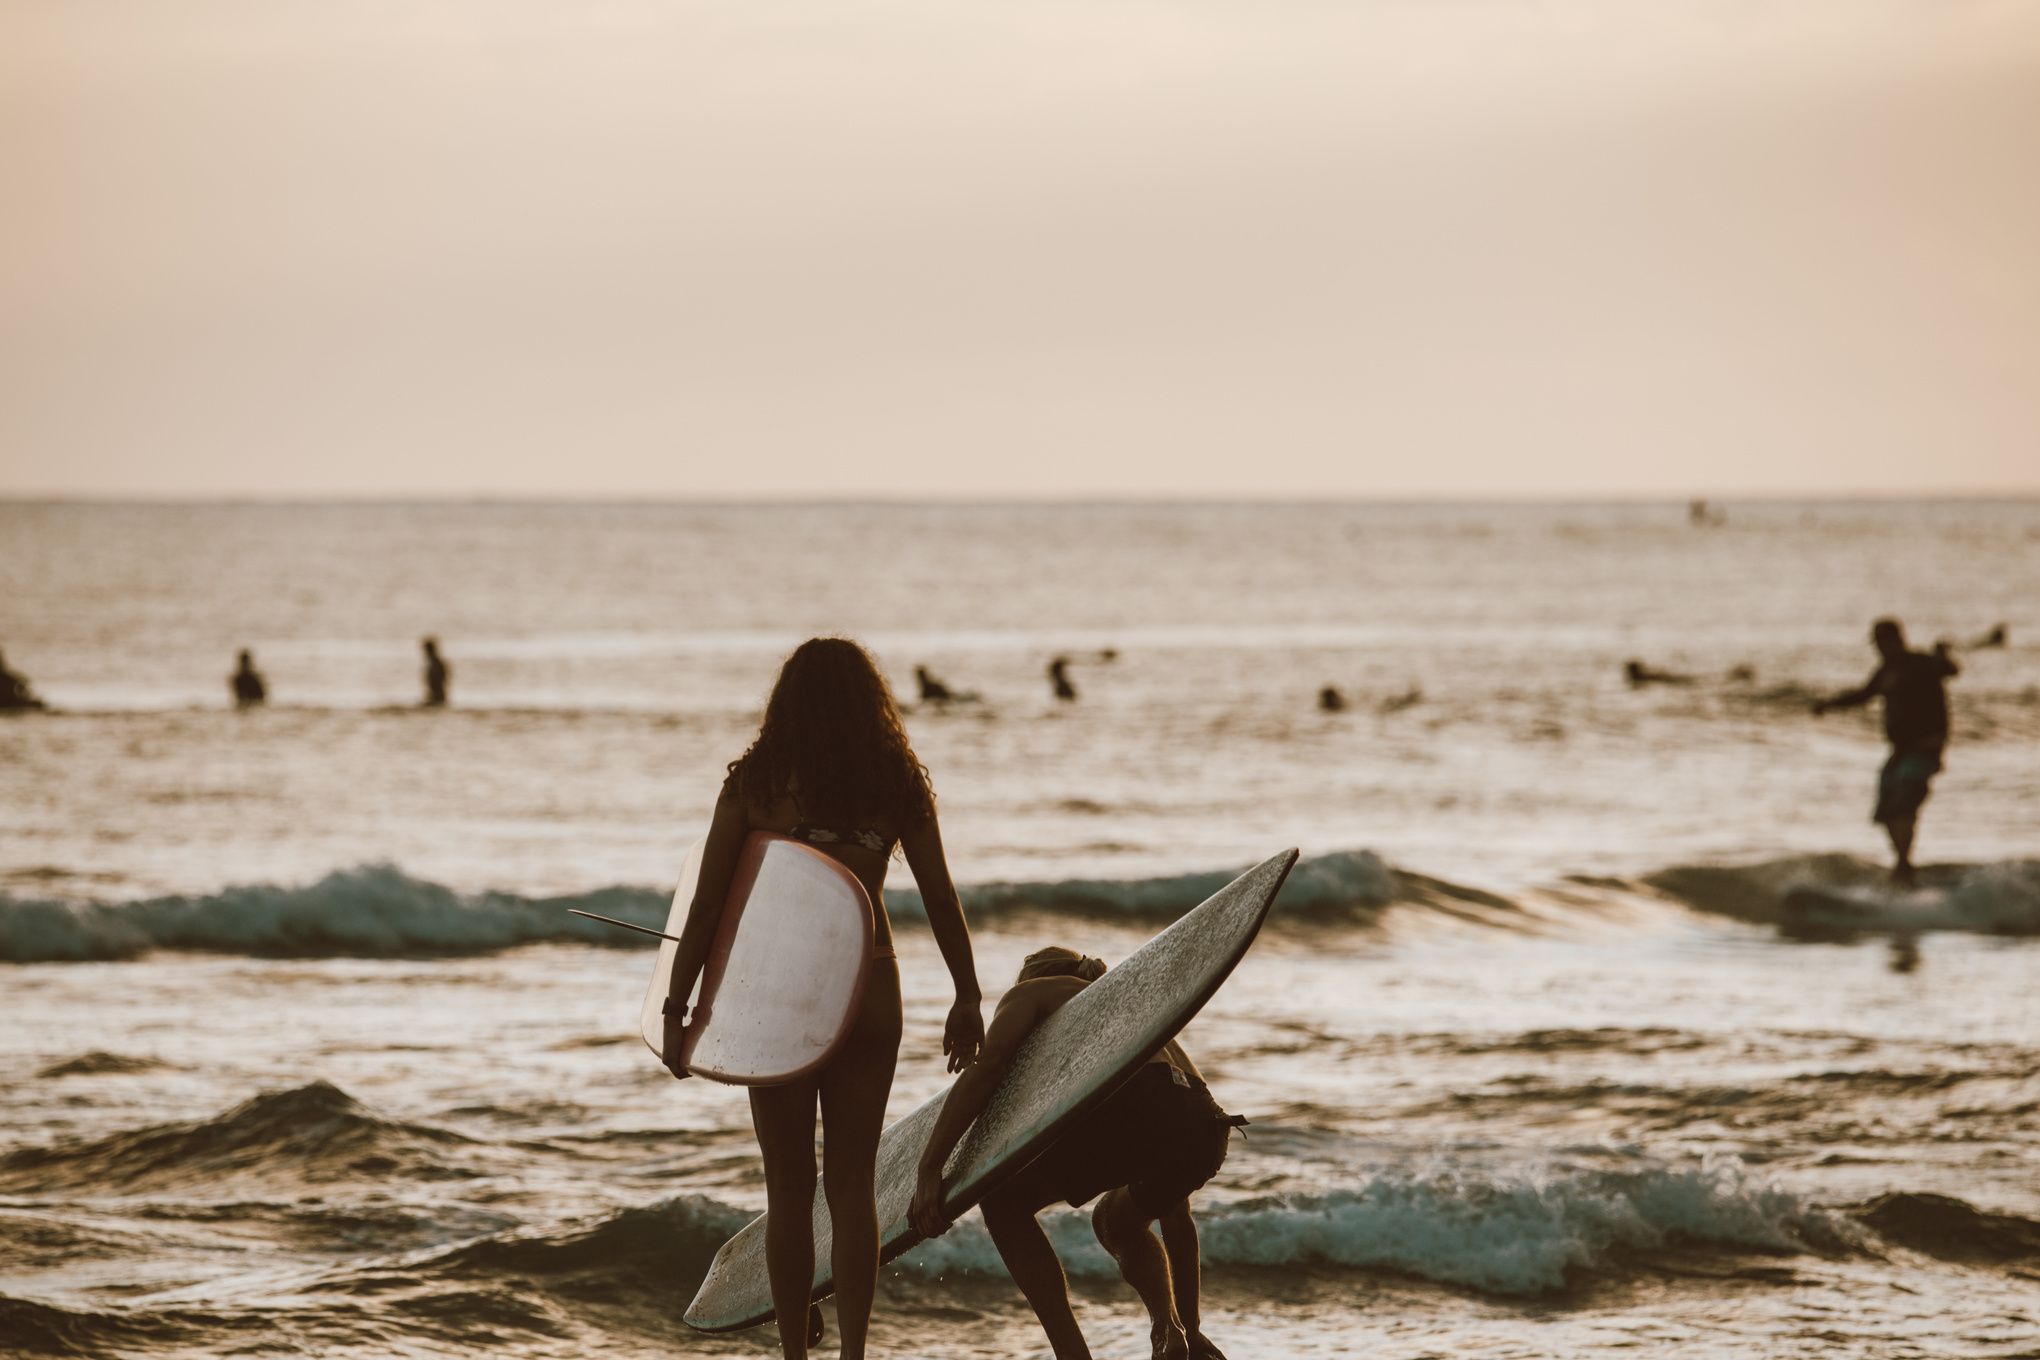 Woman in White Tank Top Holding White Surfboard on Beach